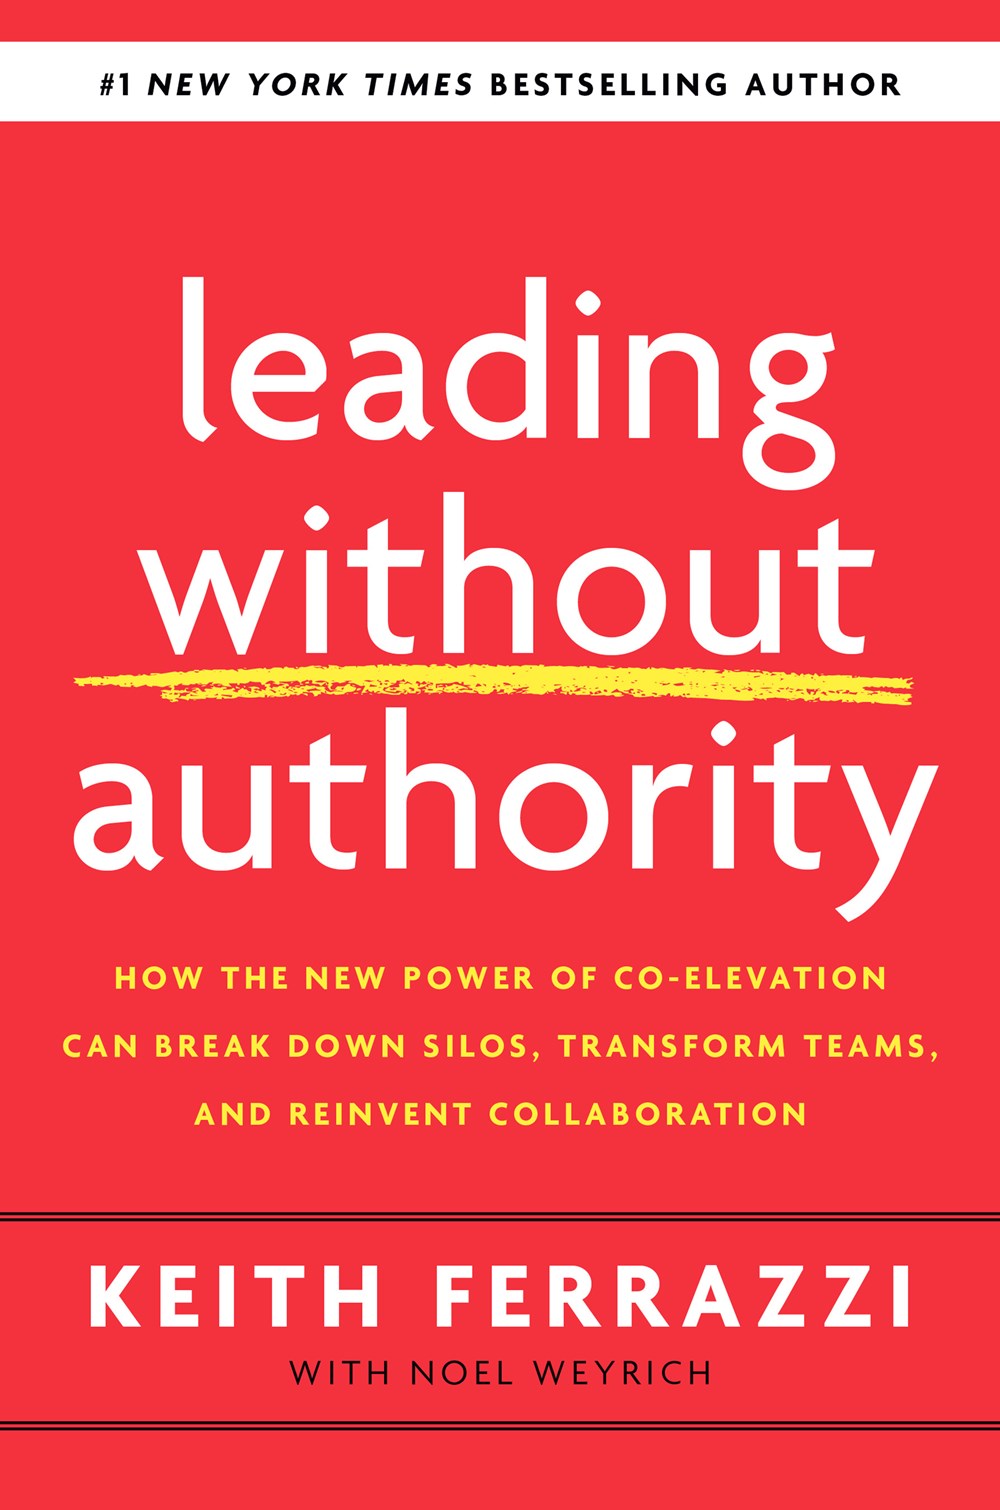  Leading Without Authority: How the New Power of Co-Elevation Can Break Down Silos, Transform Teams, and Reinvent Collaboration